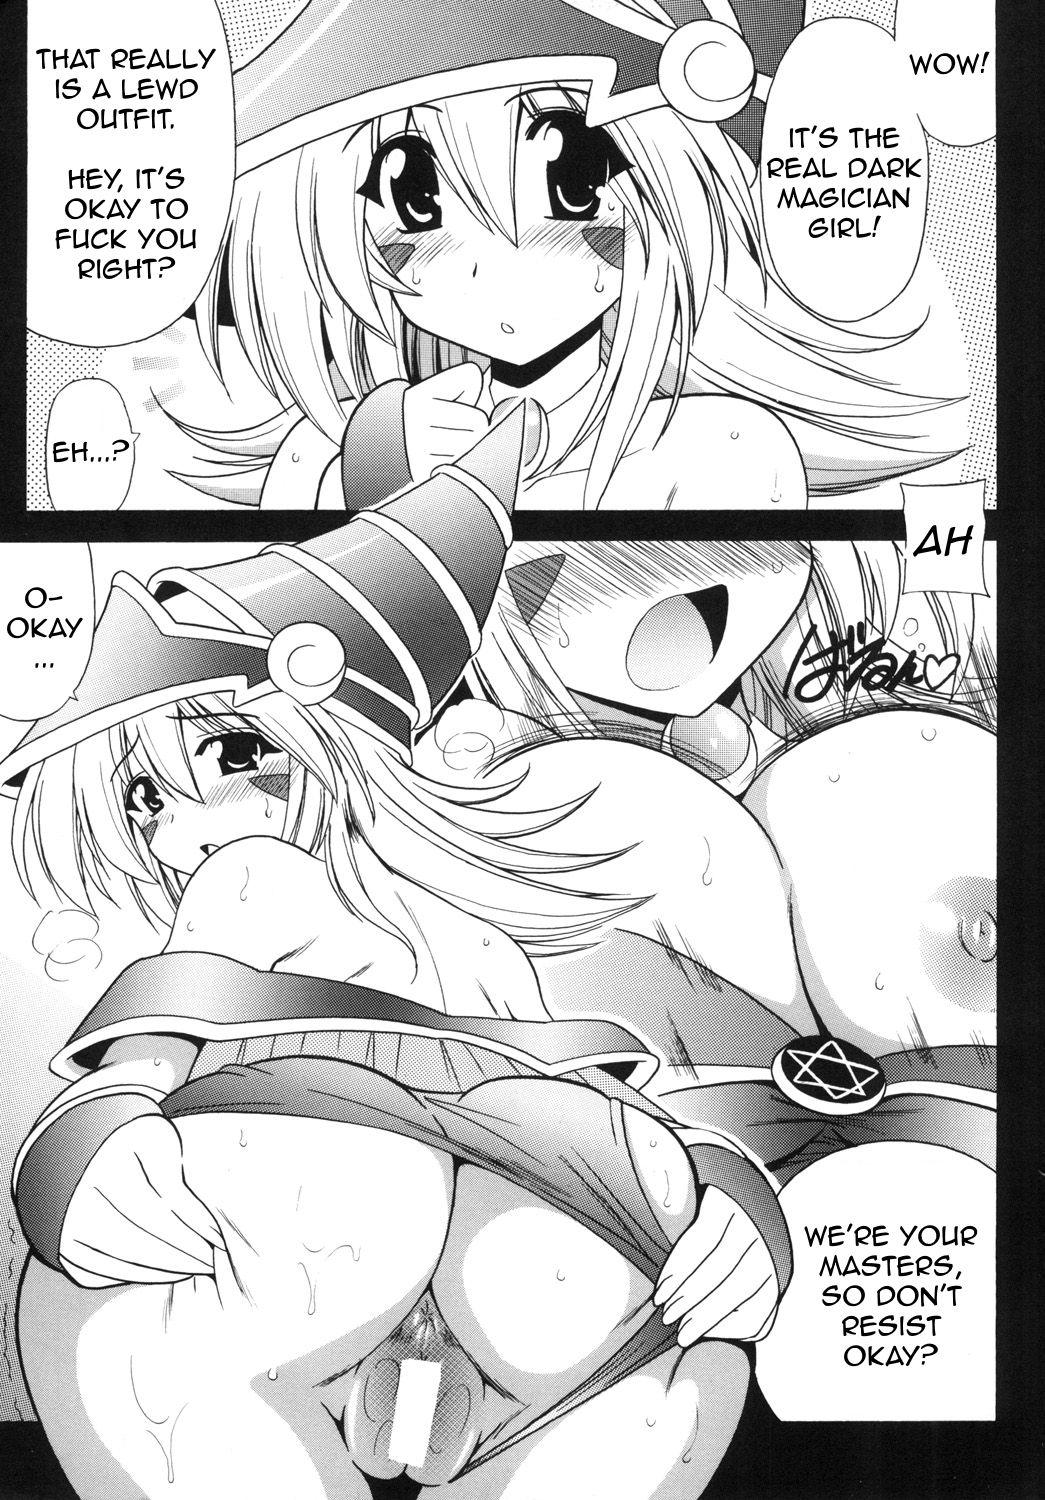 Porno 18 BMG to Ecchi Shiyou ♡ | Let's Have Sex with Dark Magician Girl ♡ - Yu gi oh Big Dildo - Page 3